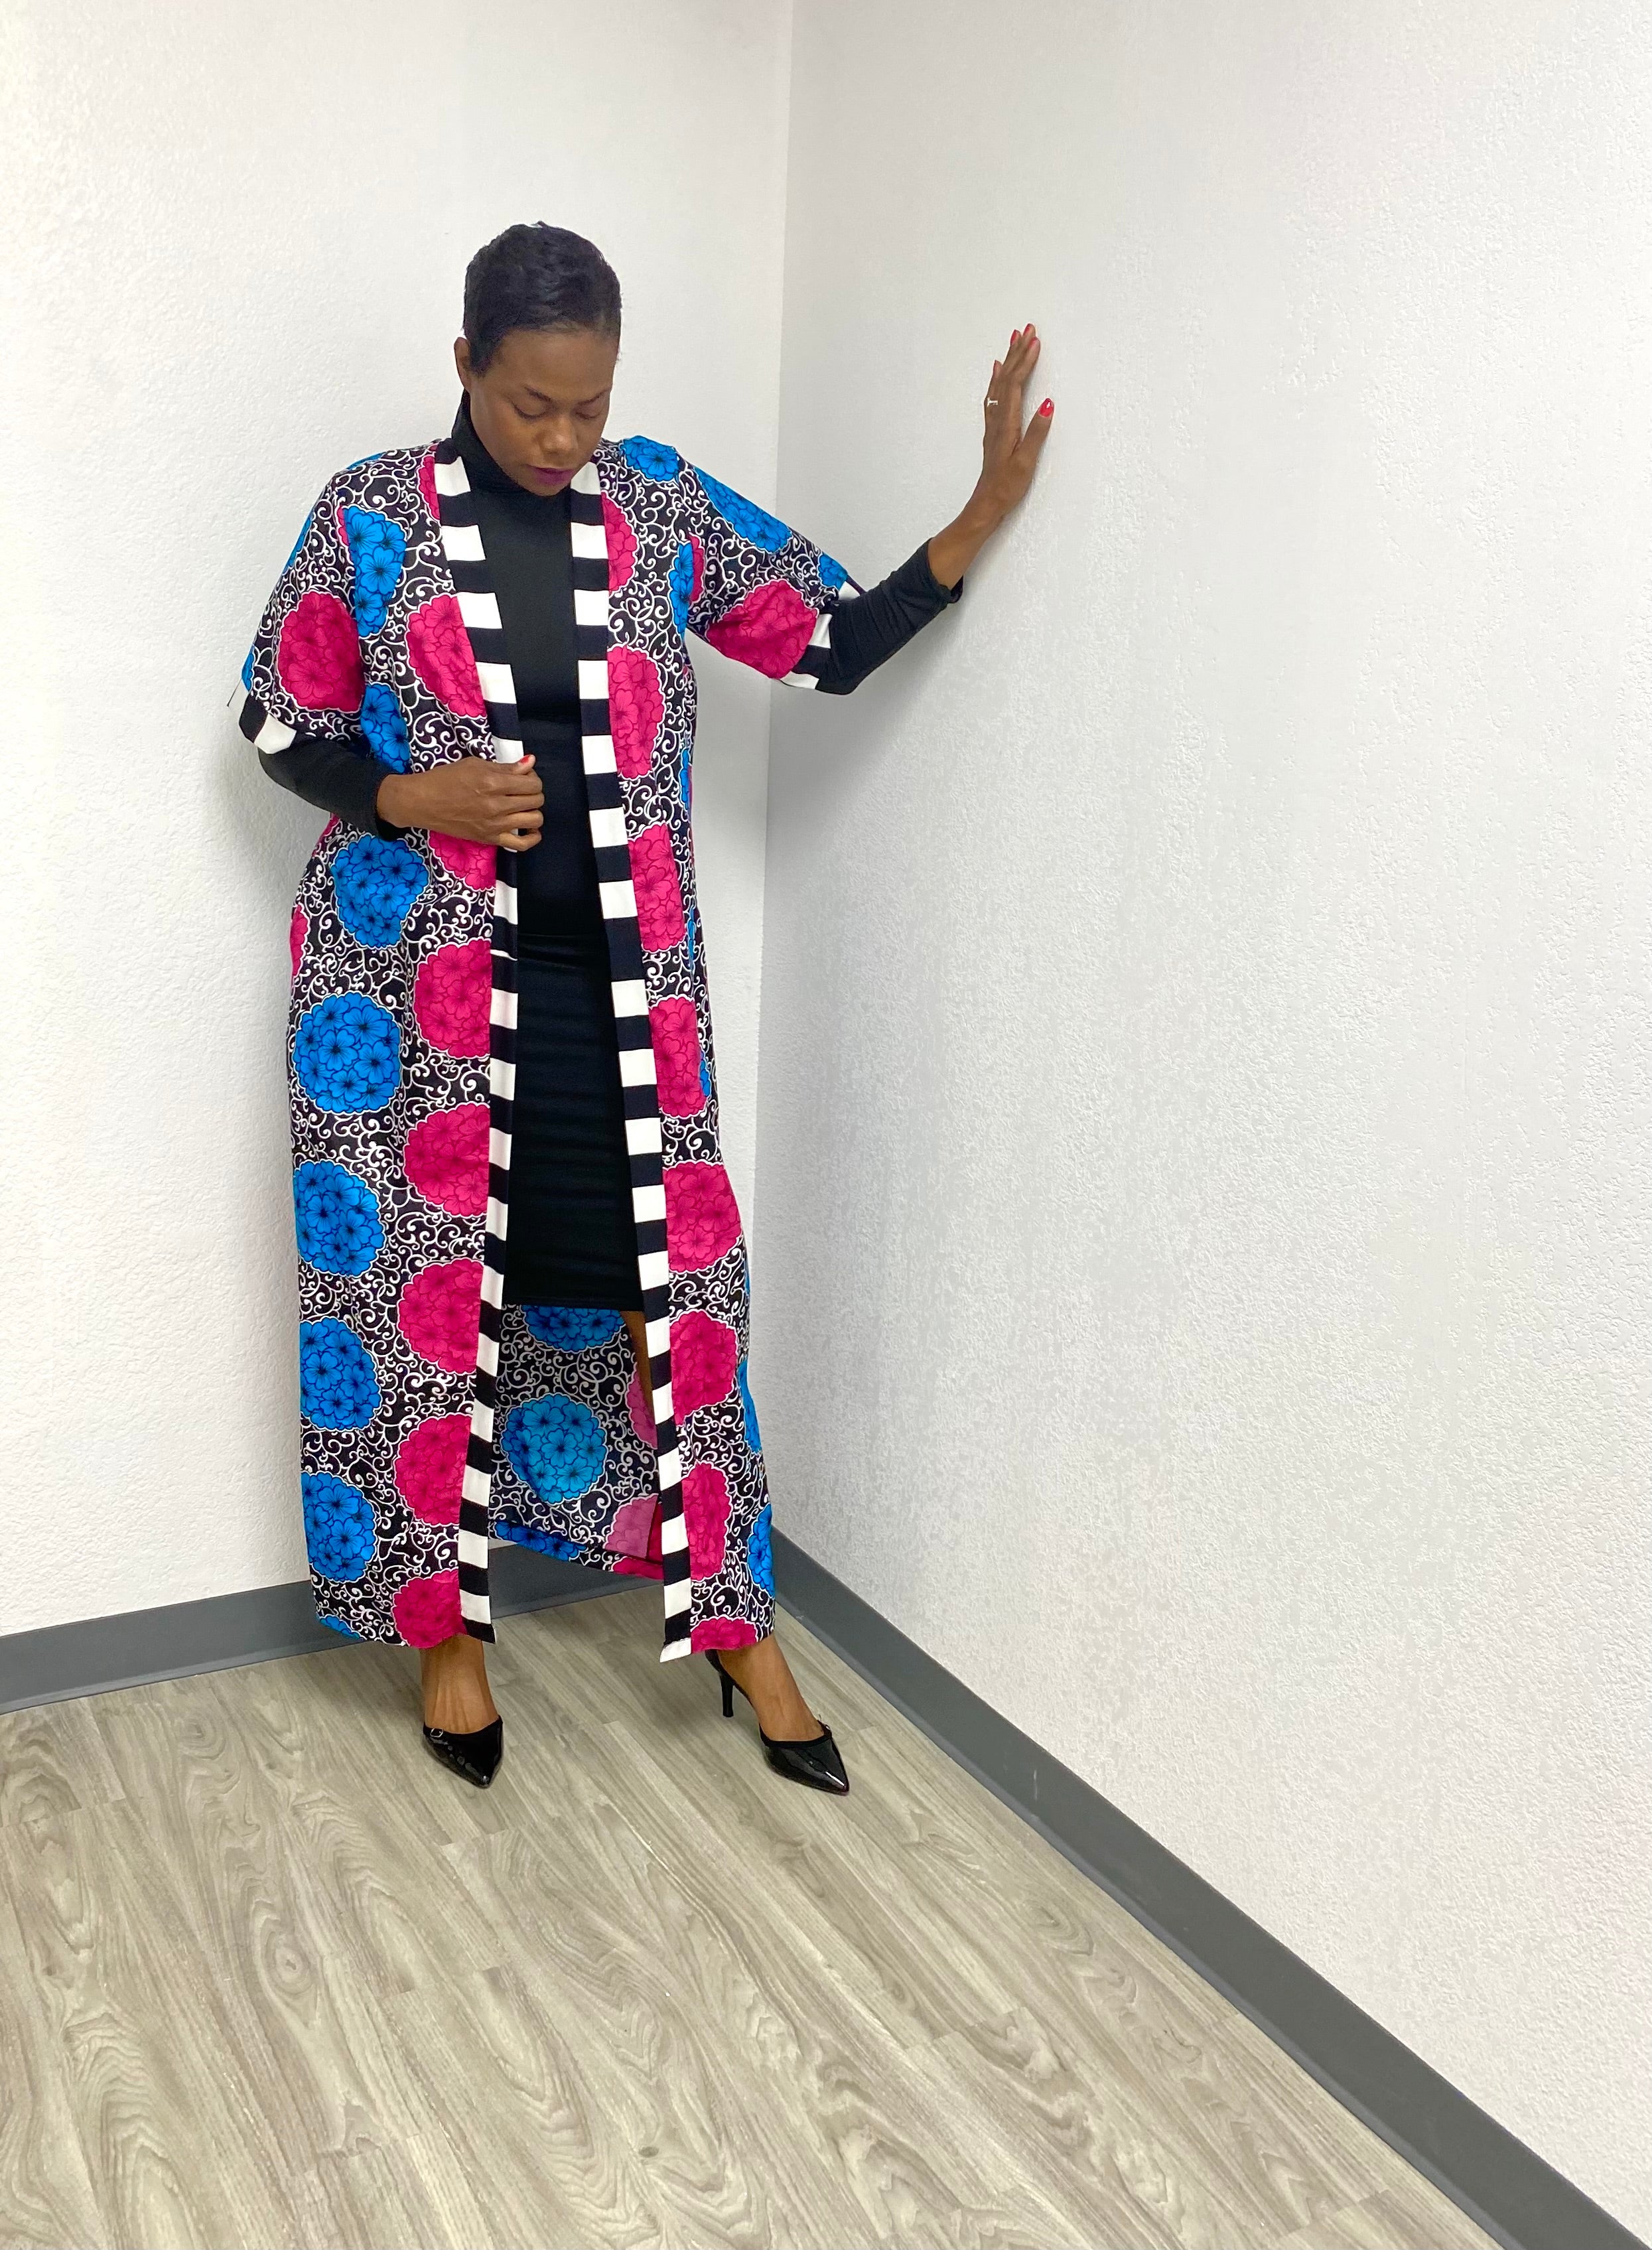 Tall Blue and Fuchsia Floral African Printed Kimono Jacket